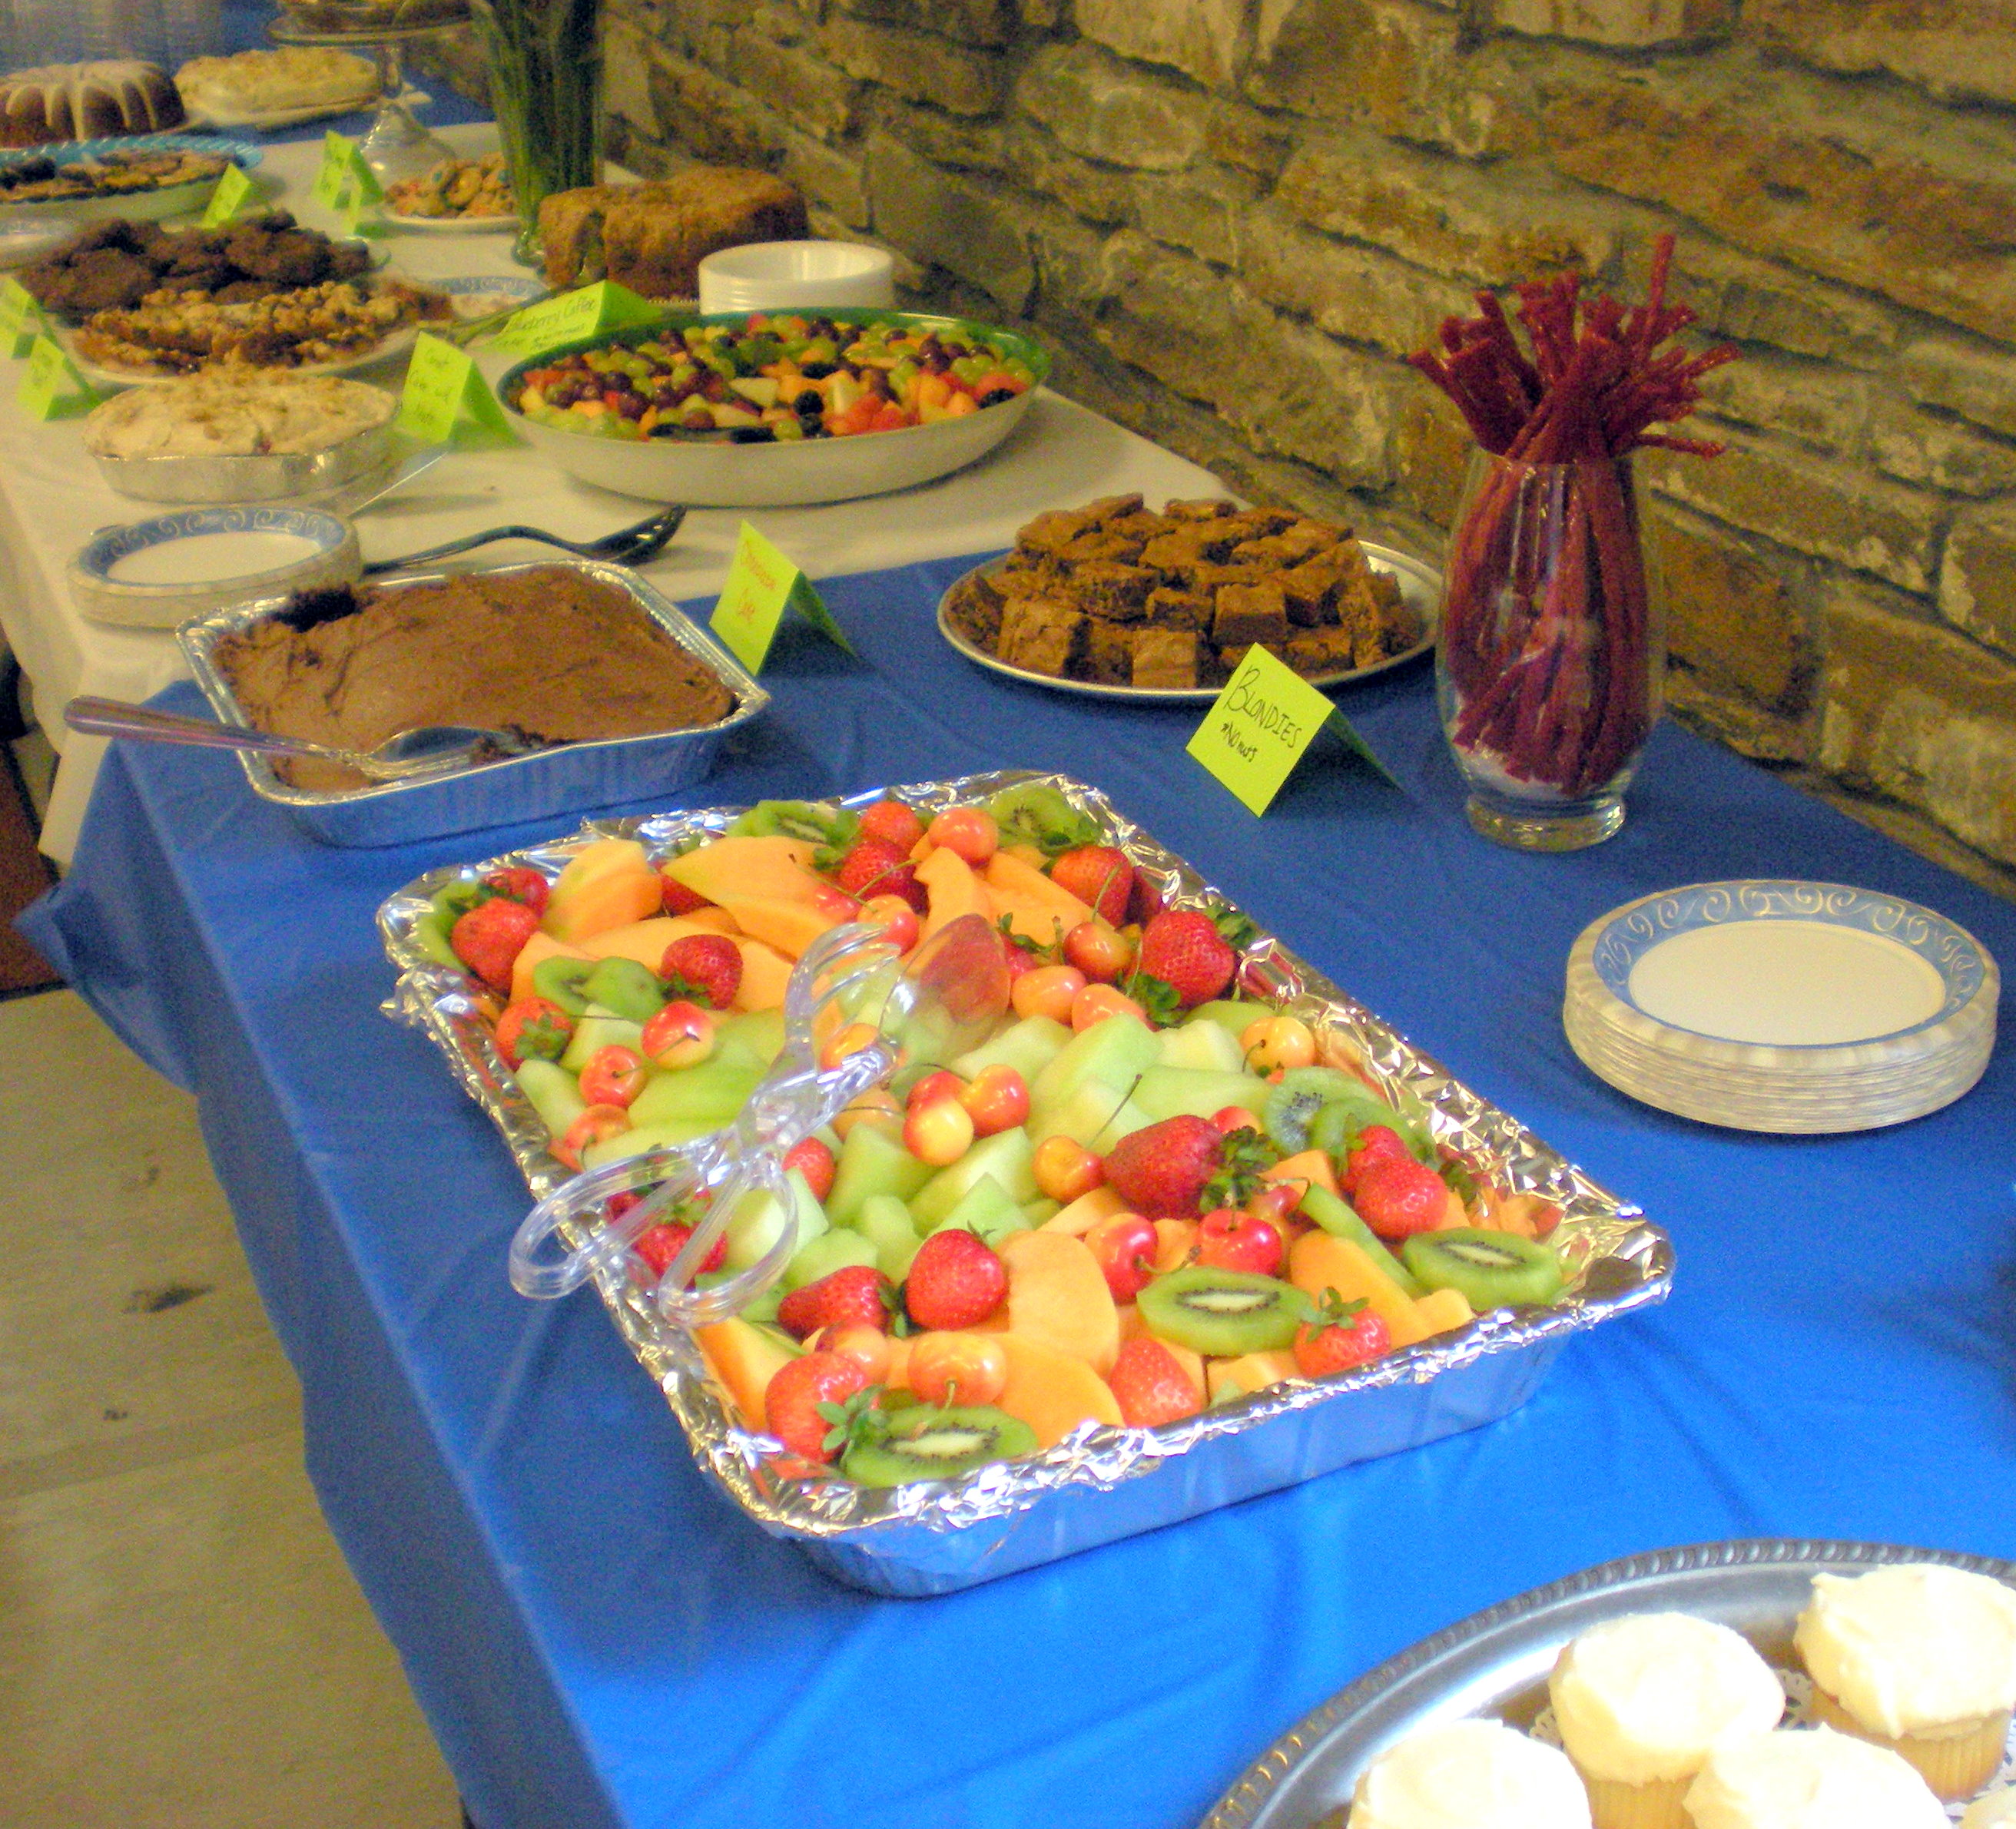 The ENDLESS dessert table: Cupcakes, fruit, brownies, carrot cake, cookies...